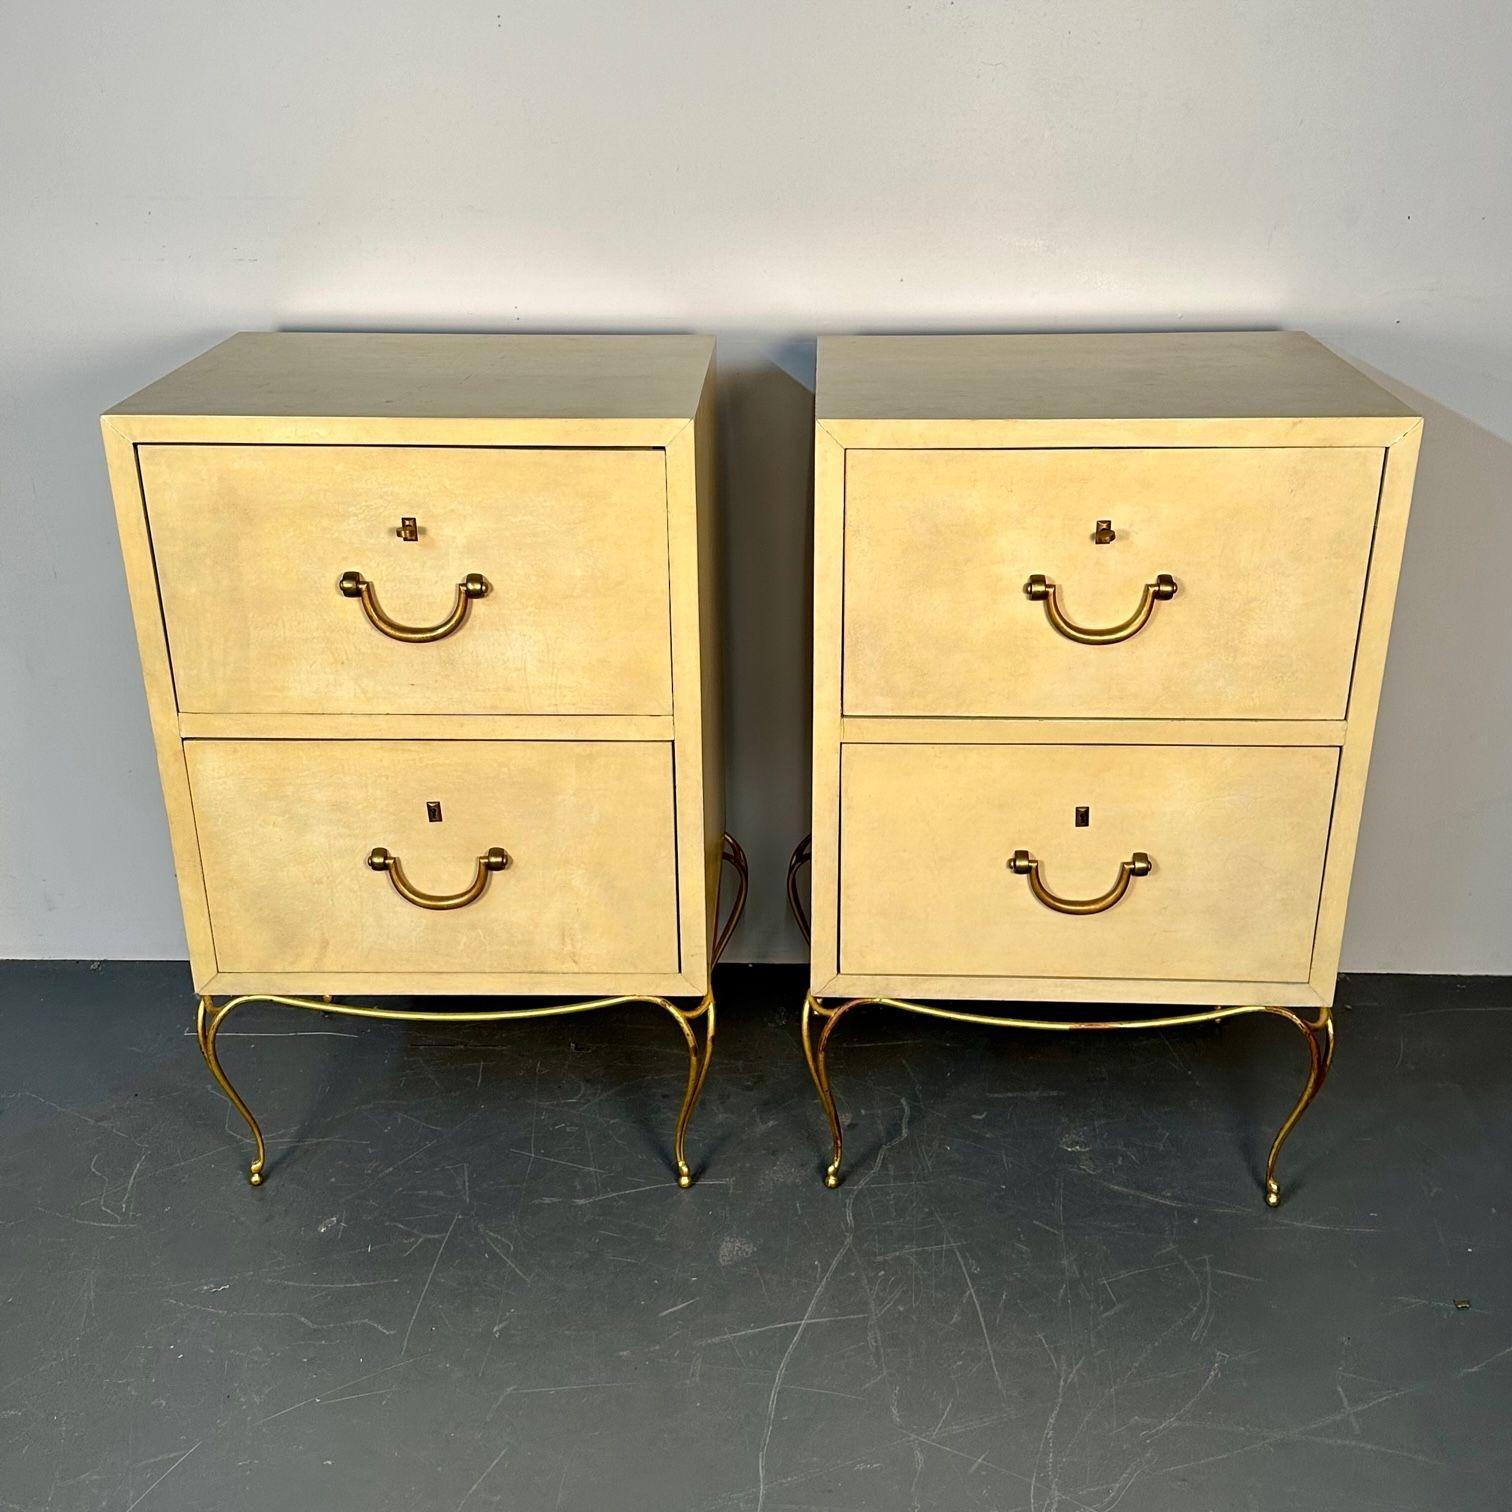 Pair Large Mid-Century French Parchment Commodes, Chests or Cabinets, 1950s
 
 A large and impressive pair of commodes or cabinets dating from the 1950s. The swirl and curved gilt metal base supporting a pair of large 15 inch deep drawers with heavy